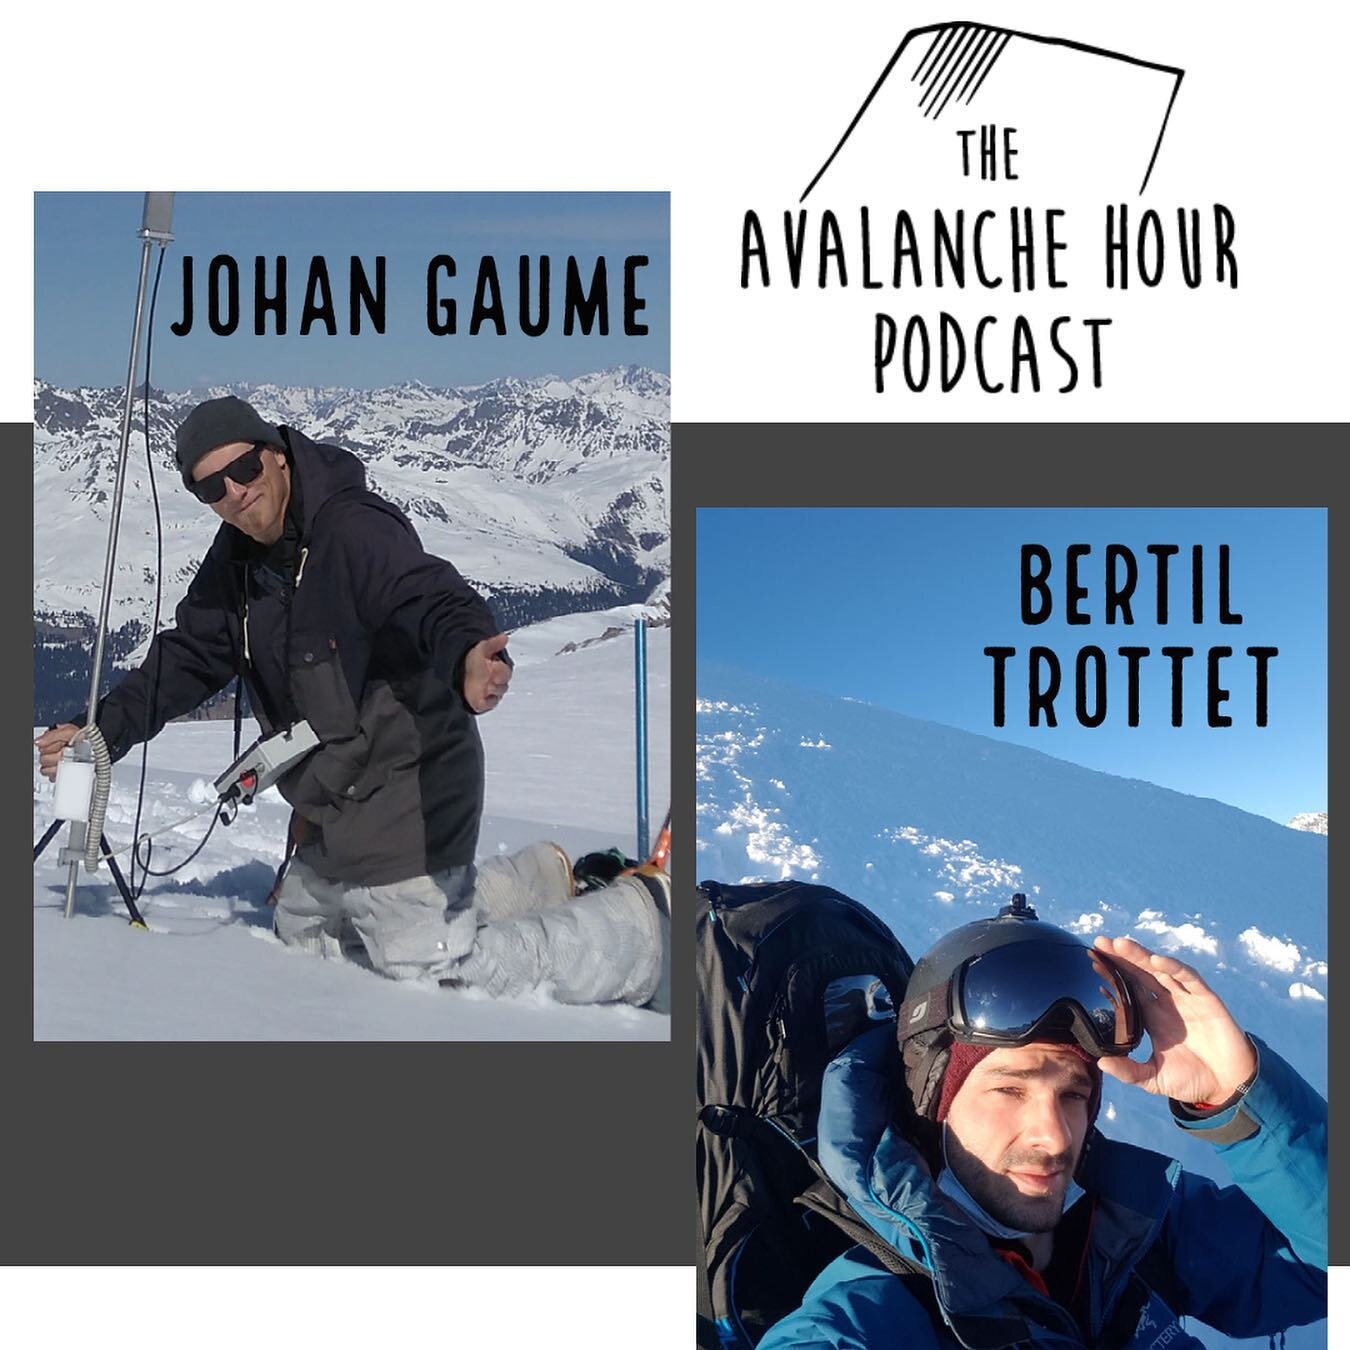 Episode 6.22 hosted by Matthias Walcher is up and running! Spring is in full bloom but you are still thinking snow? You think a bike is best put to use to approach some late season ski touring this time of year? Perfect- because this podcast requires